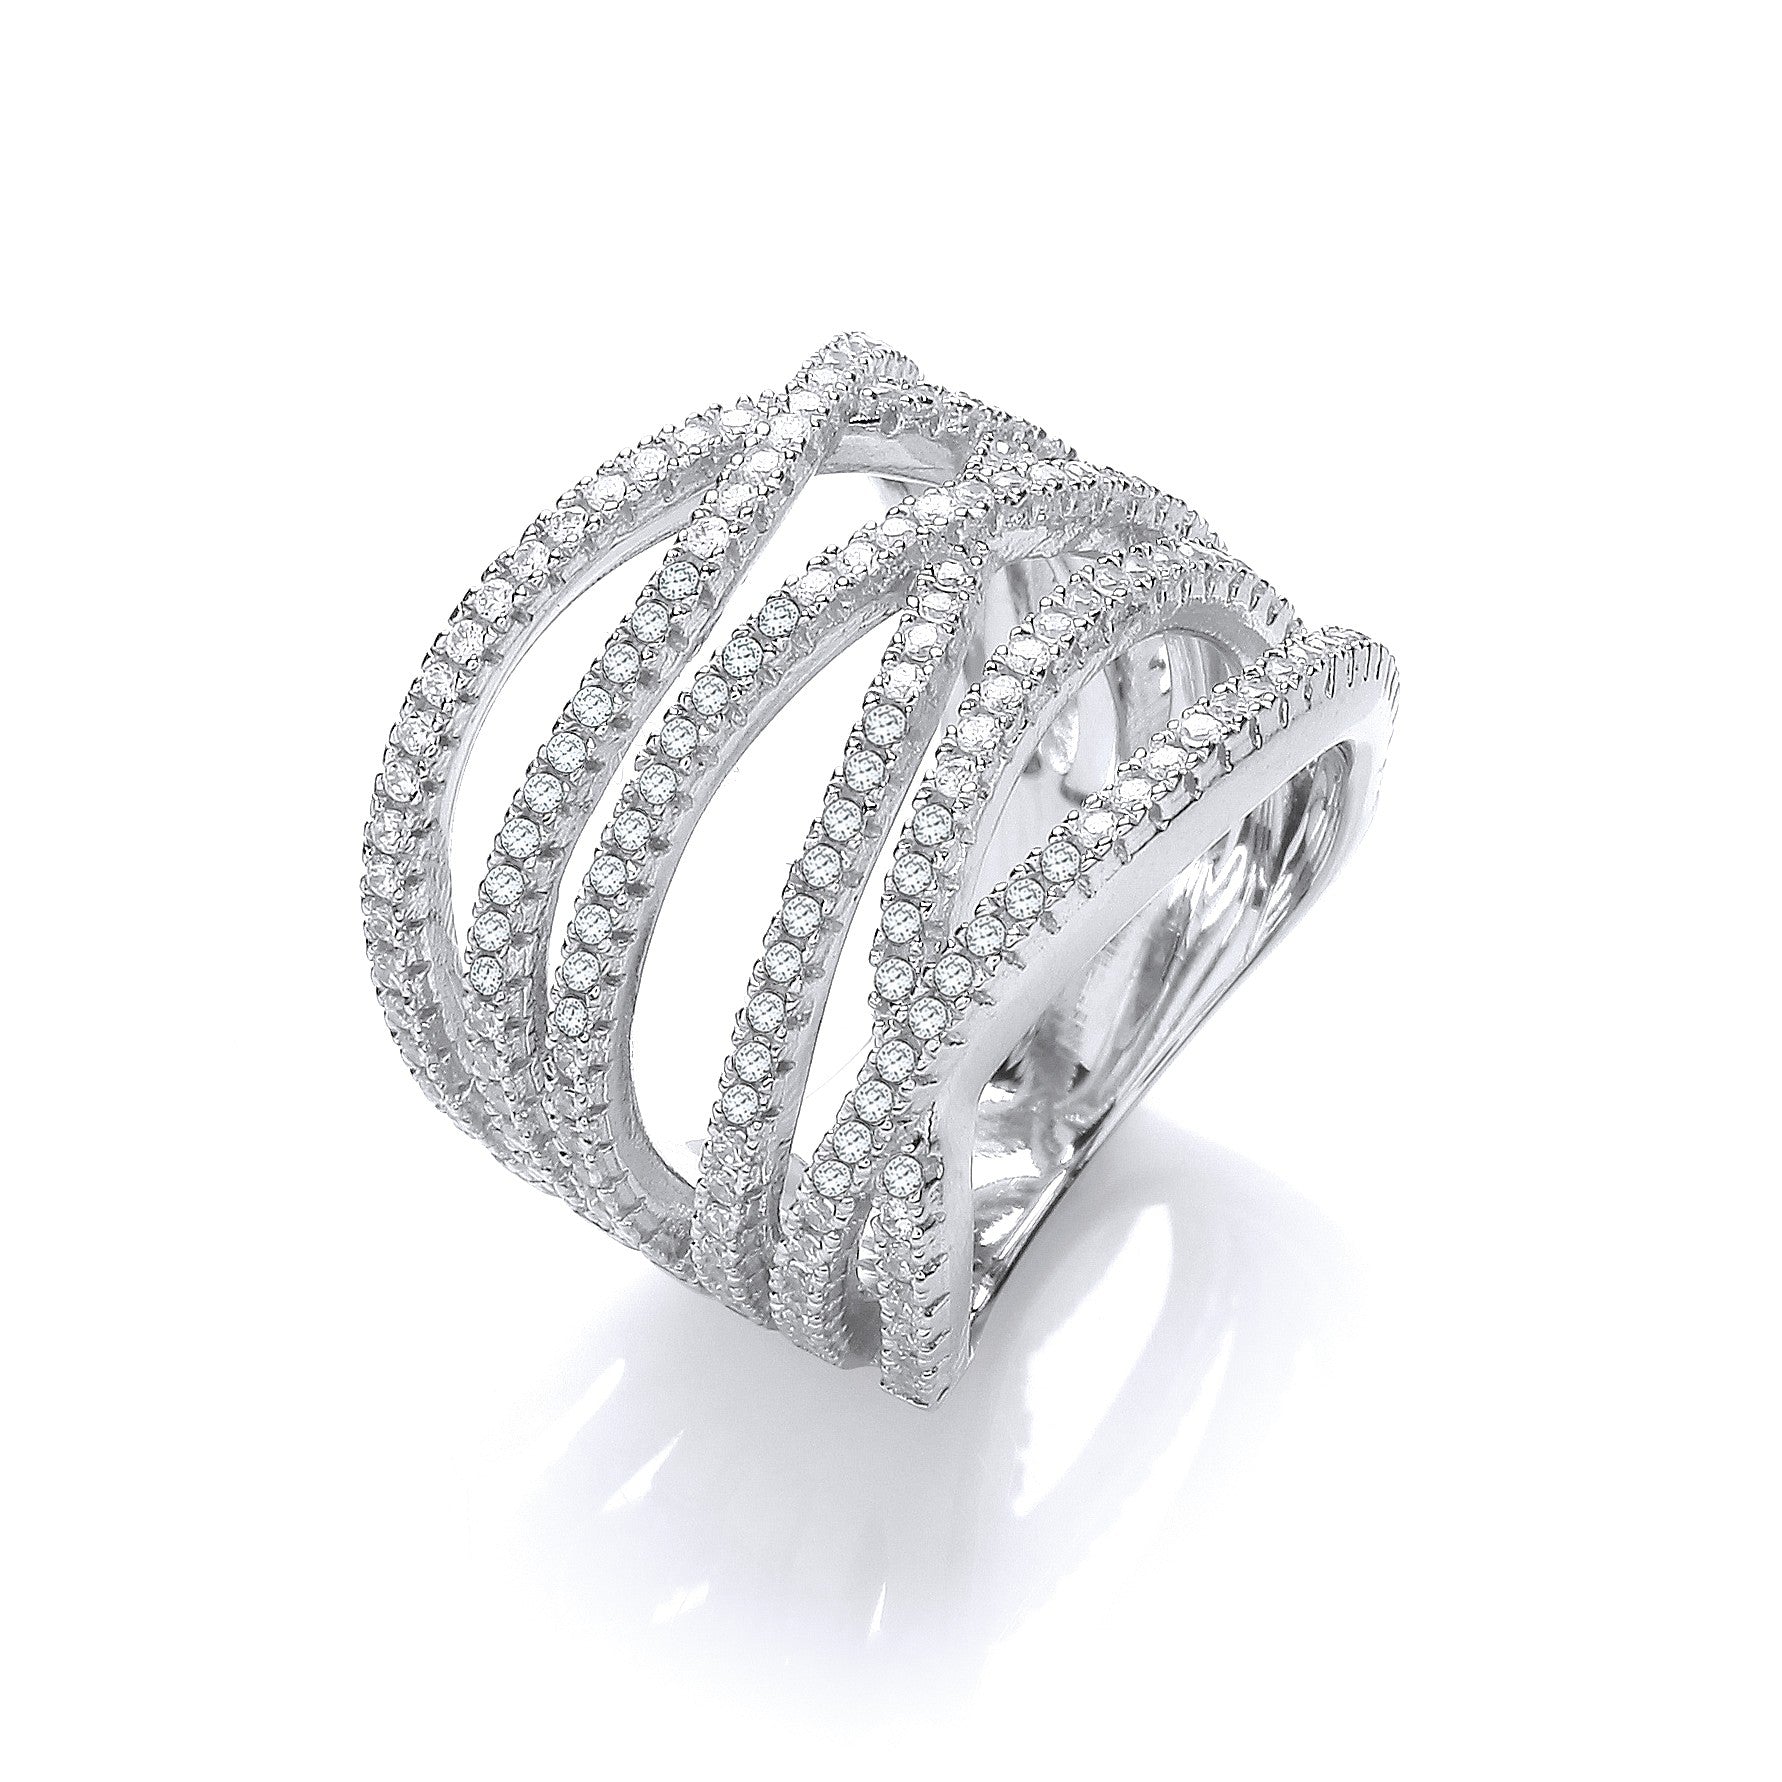 Micro Pave' Six Rows of Clear Cubic Zirconia Ring